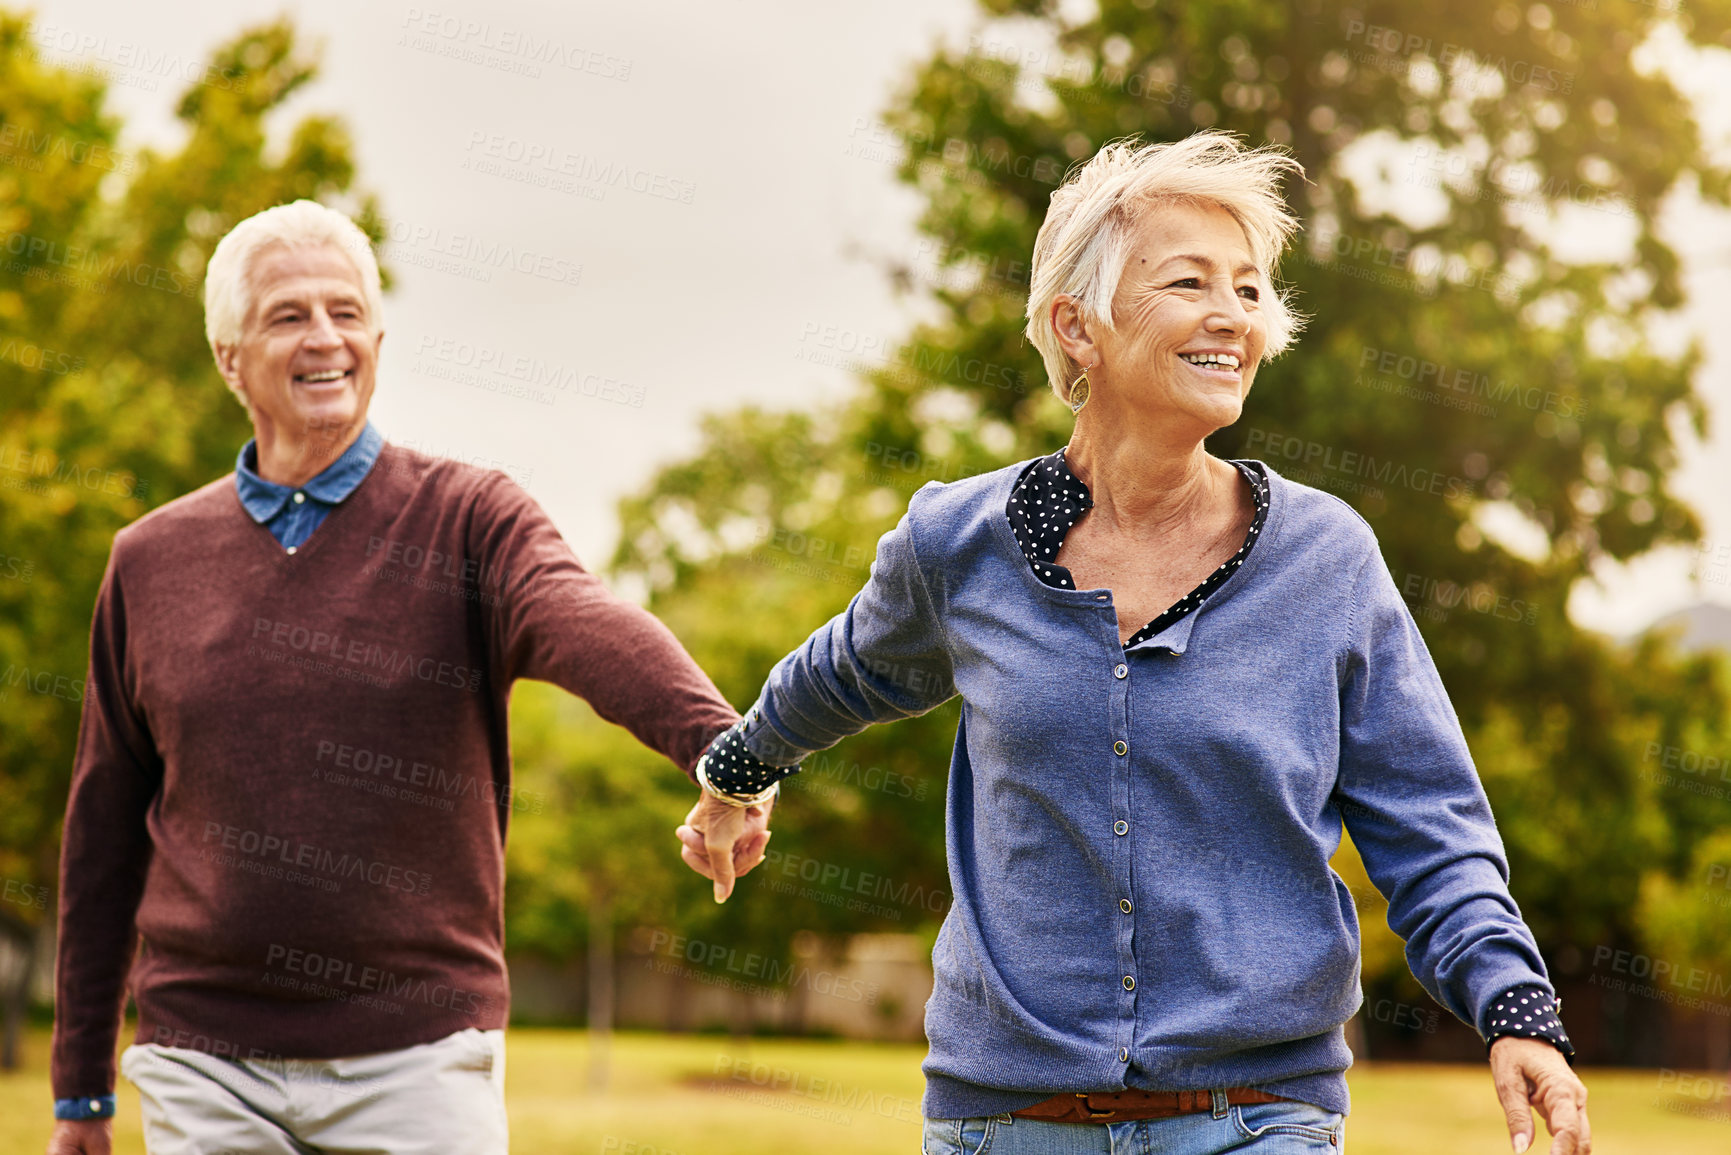 Buy stock photo Shot of a happy senior couple going for a walk in the park